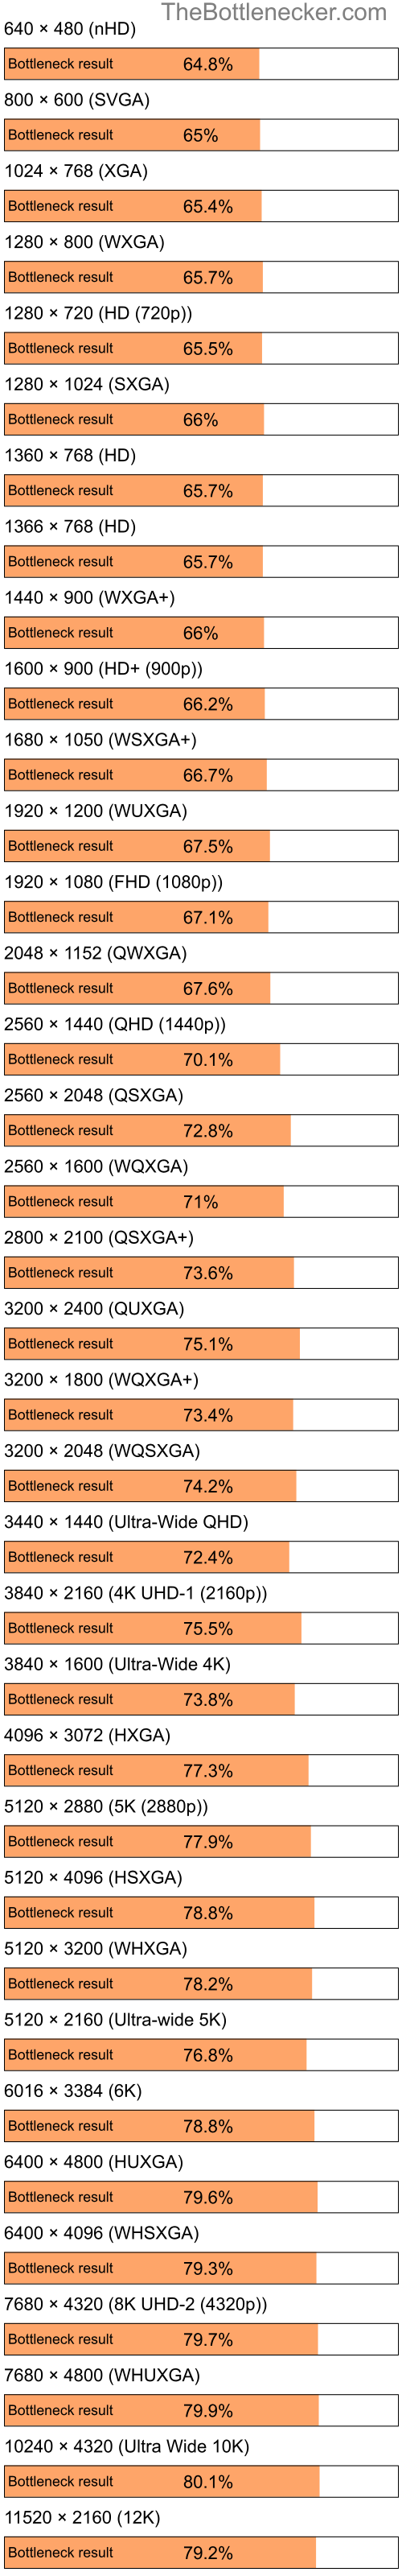 Bottleneck results by resolution for Intel Celeron M 410 and NVIDIA Quadro FX 370 in General Tasks